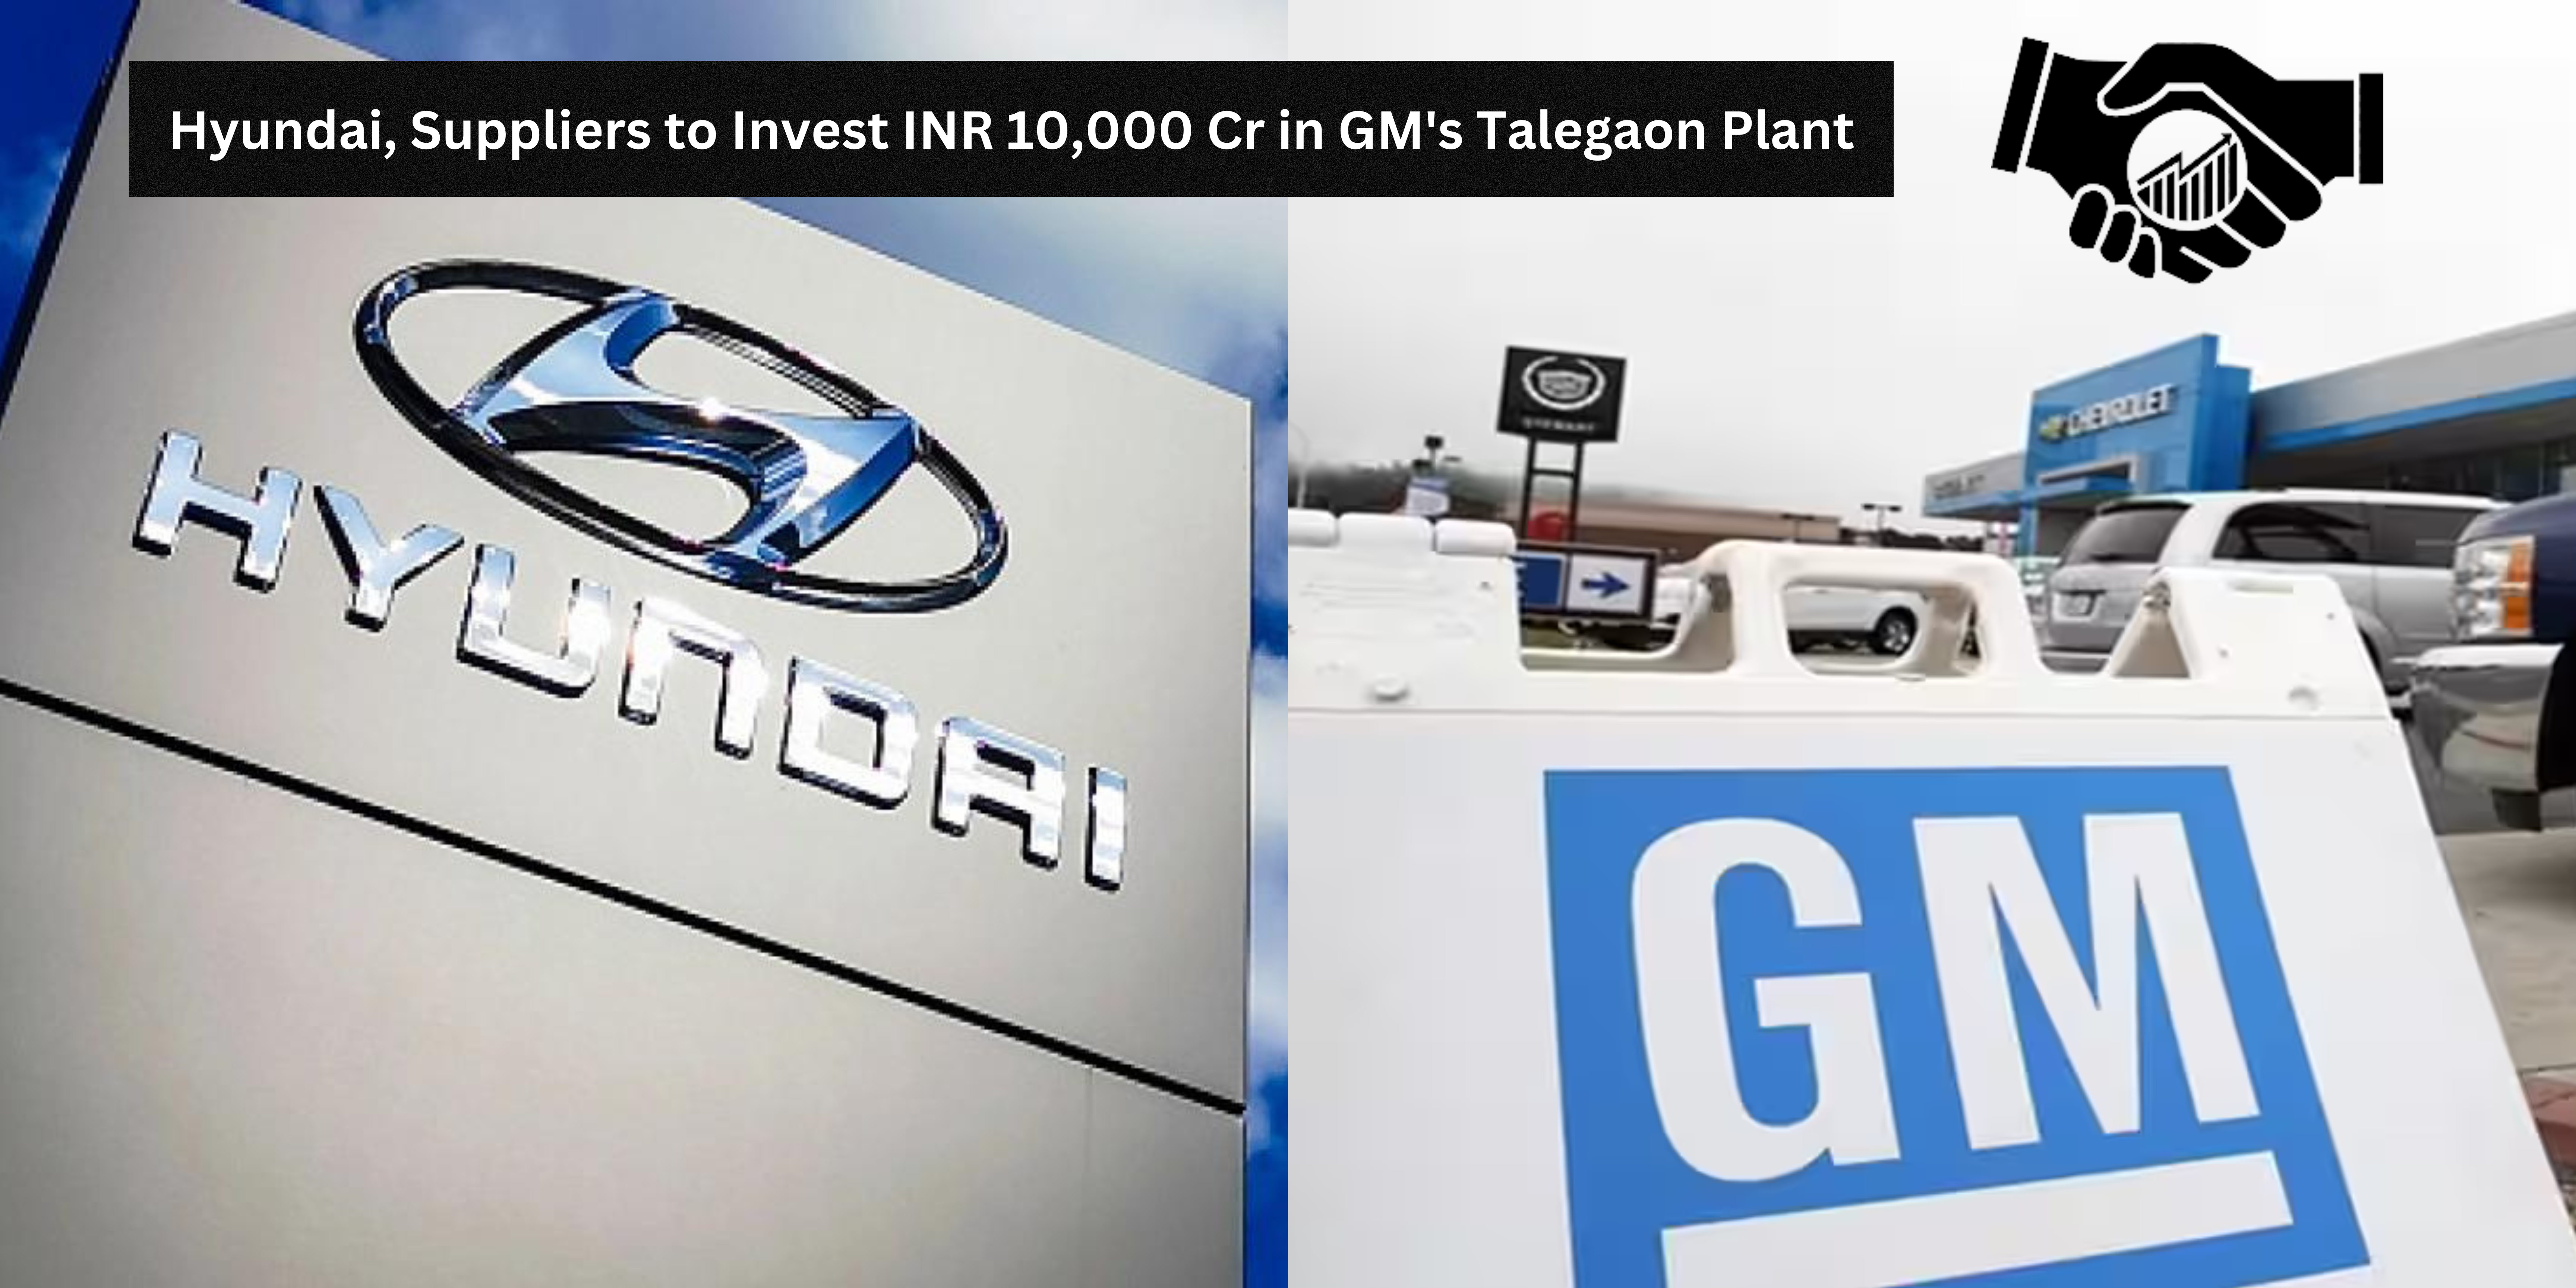 Hyundai, Suppliers to Invest INR 10,000 Cr in GM's Talegaon Plant